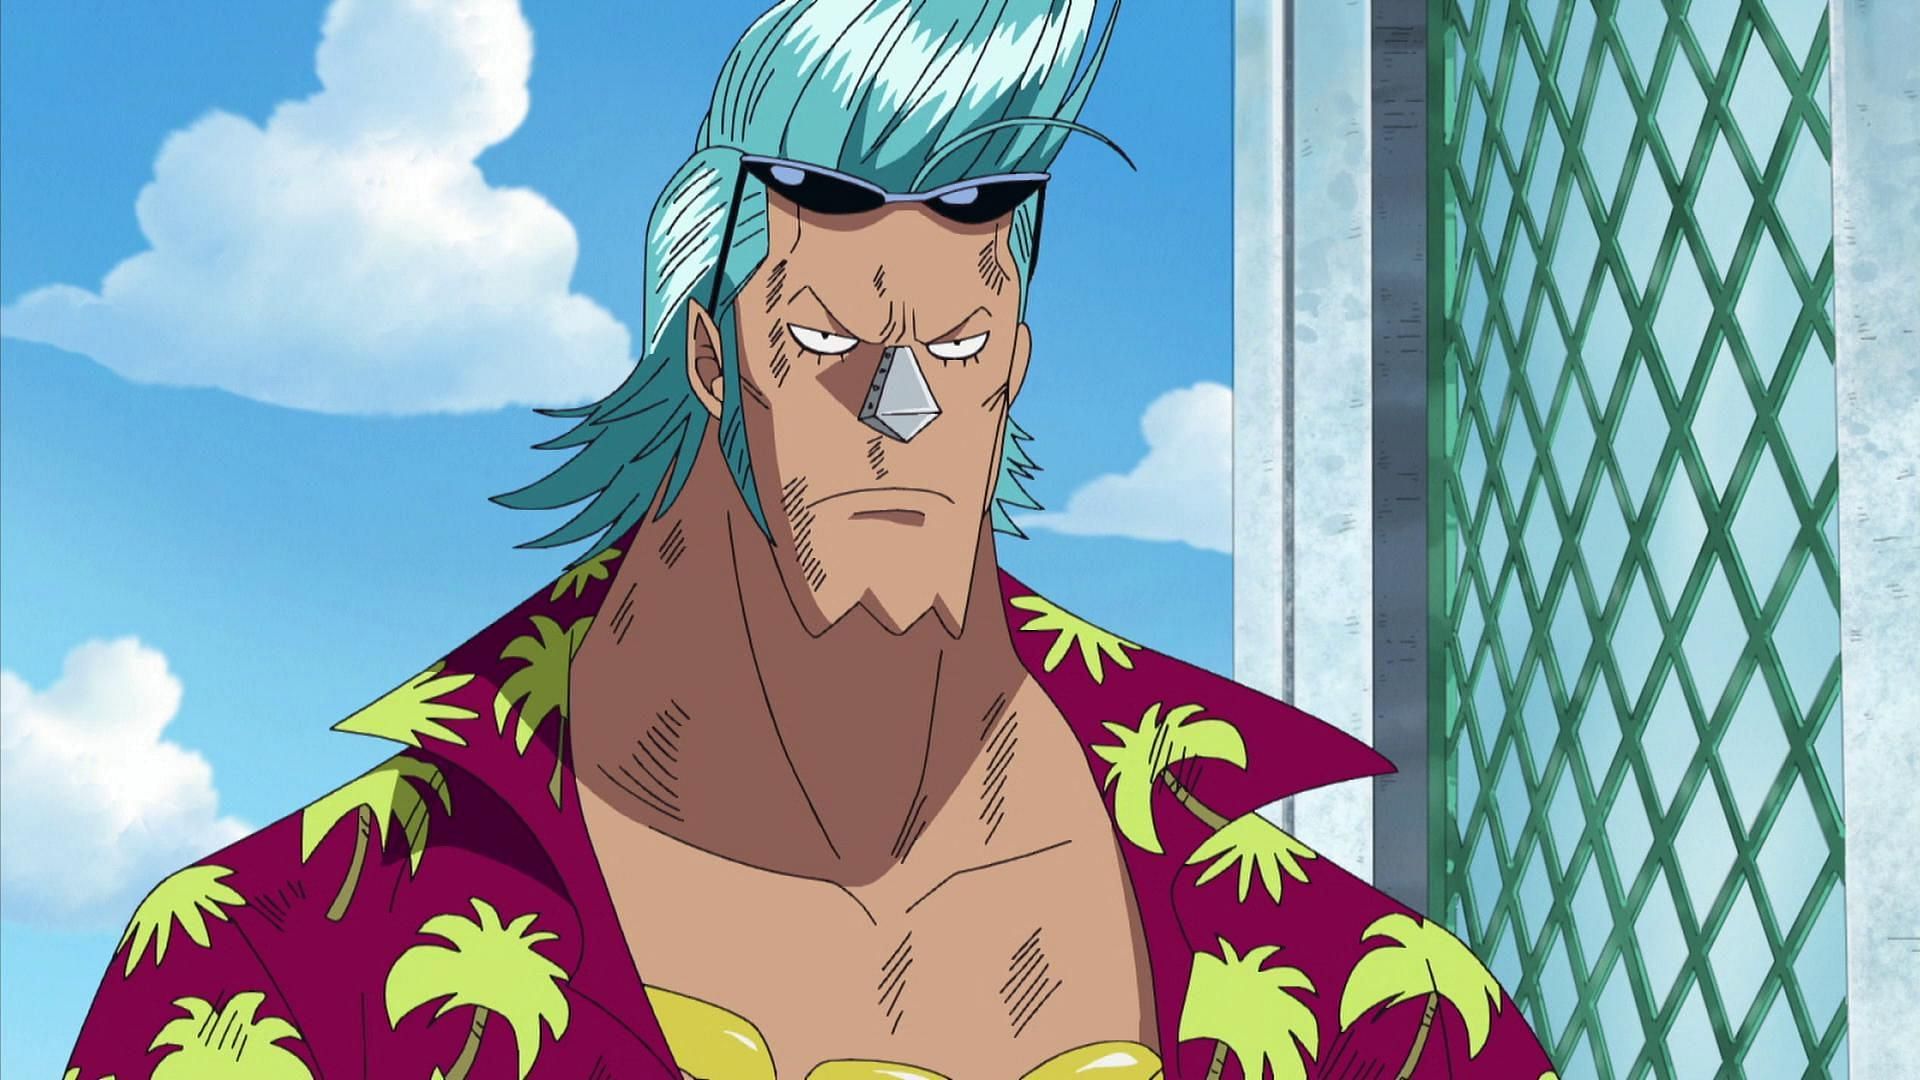 Franky as seen in the One Piece anime series (Image via Toei Animation)